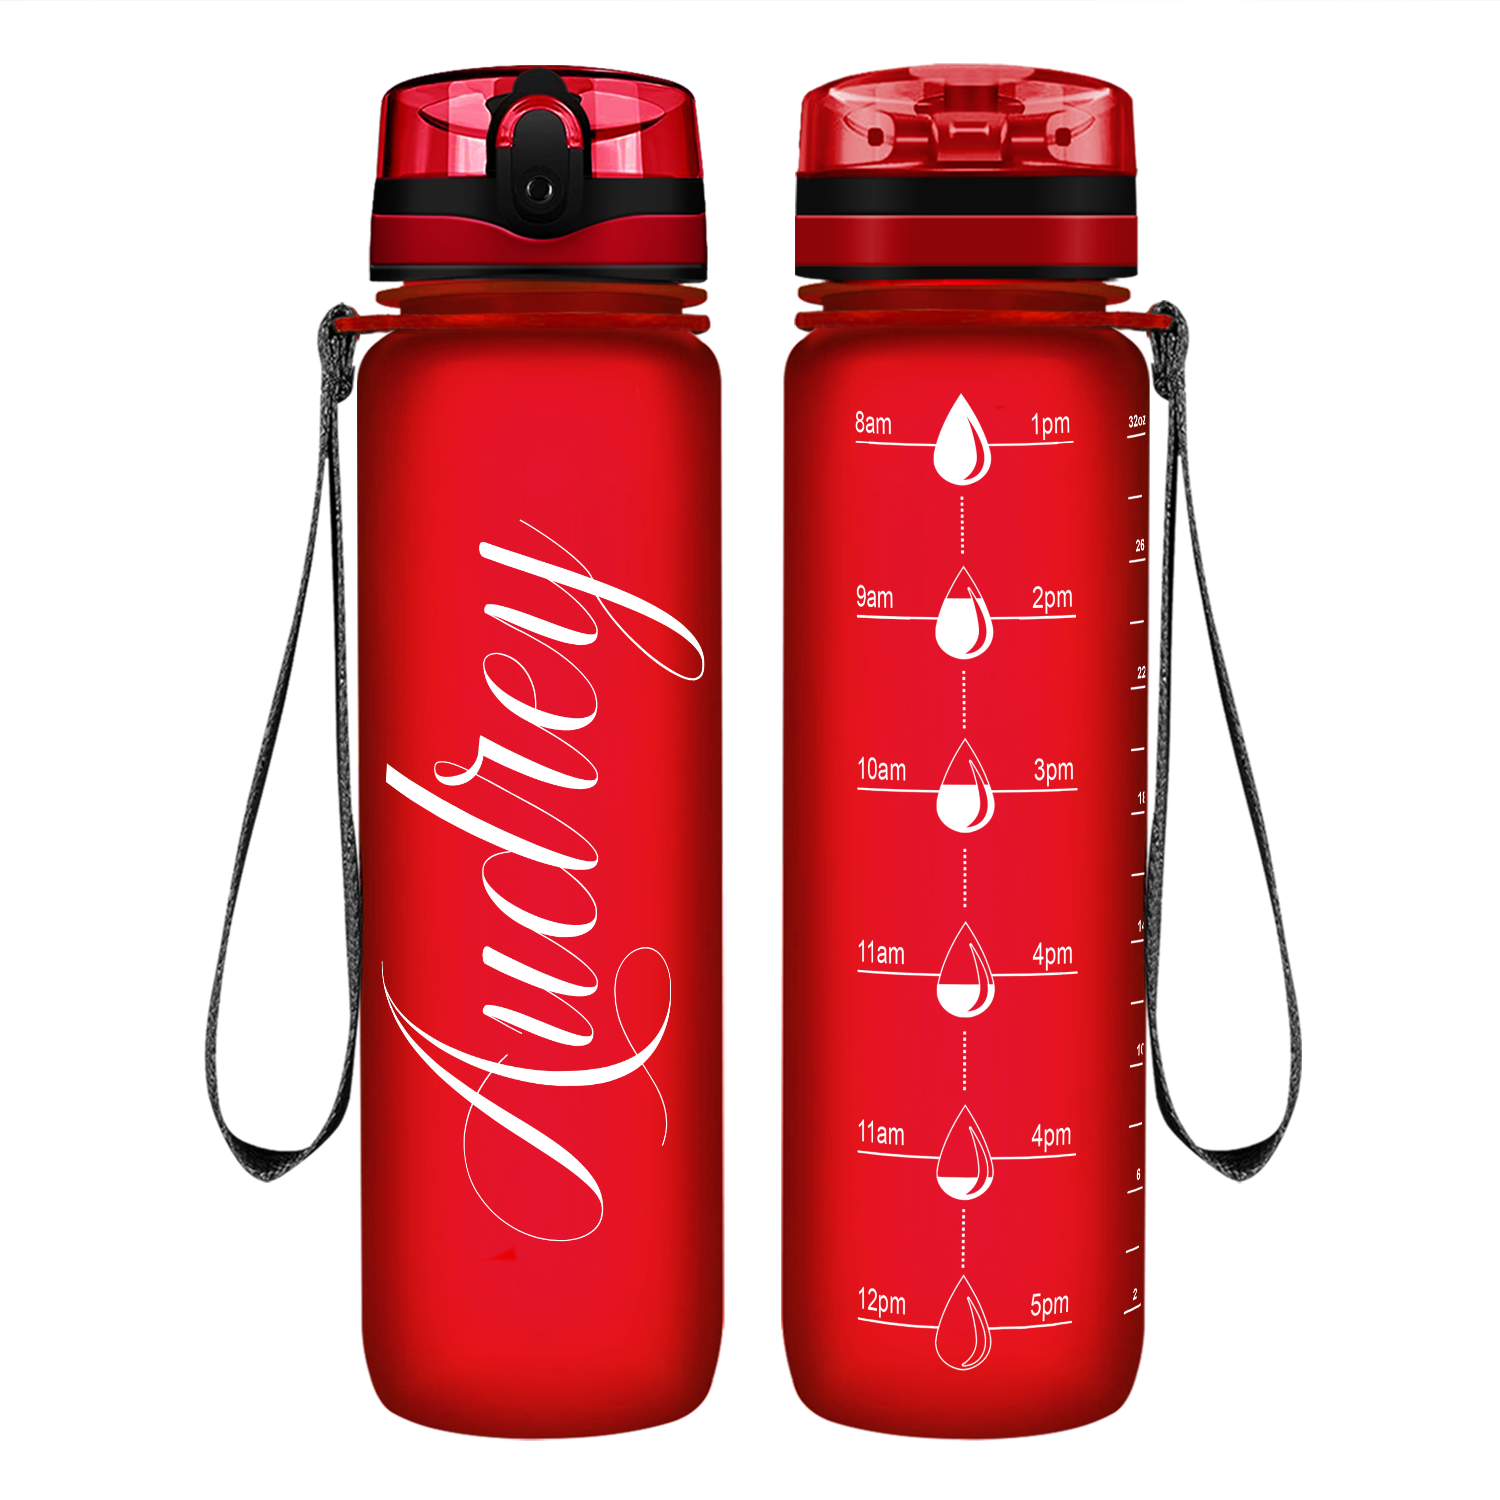 Personalized Water Bottles with Vinyl Decals 😍 